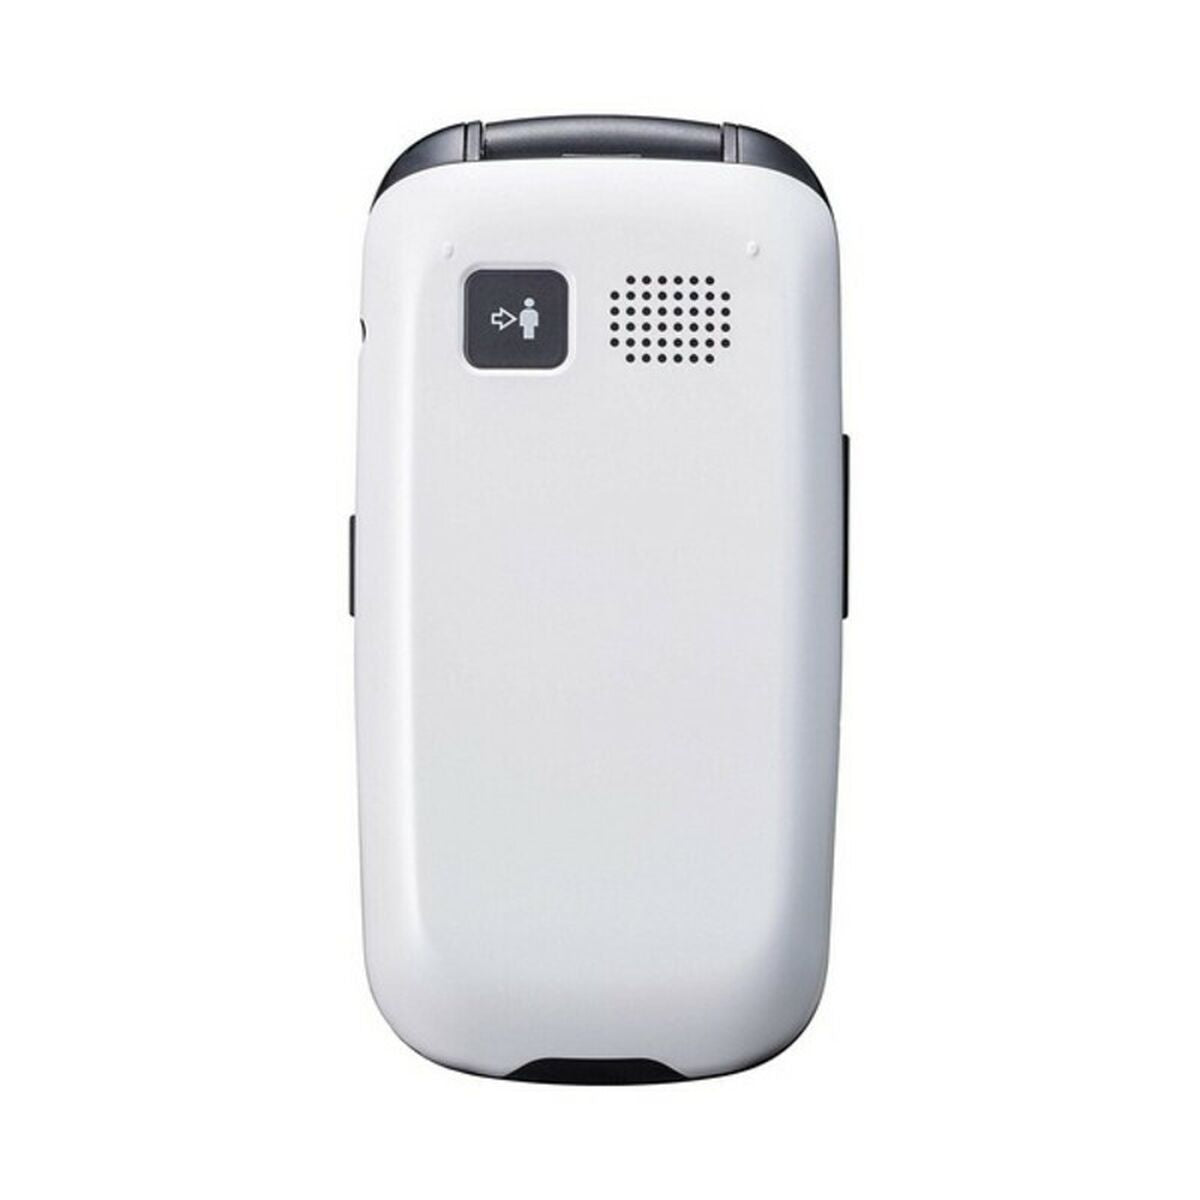 Mobile telephone for older adults Panasonic Corp. KX-TU456EXCE 2,4 LCD Bluetooth USB